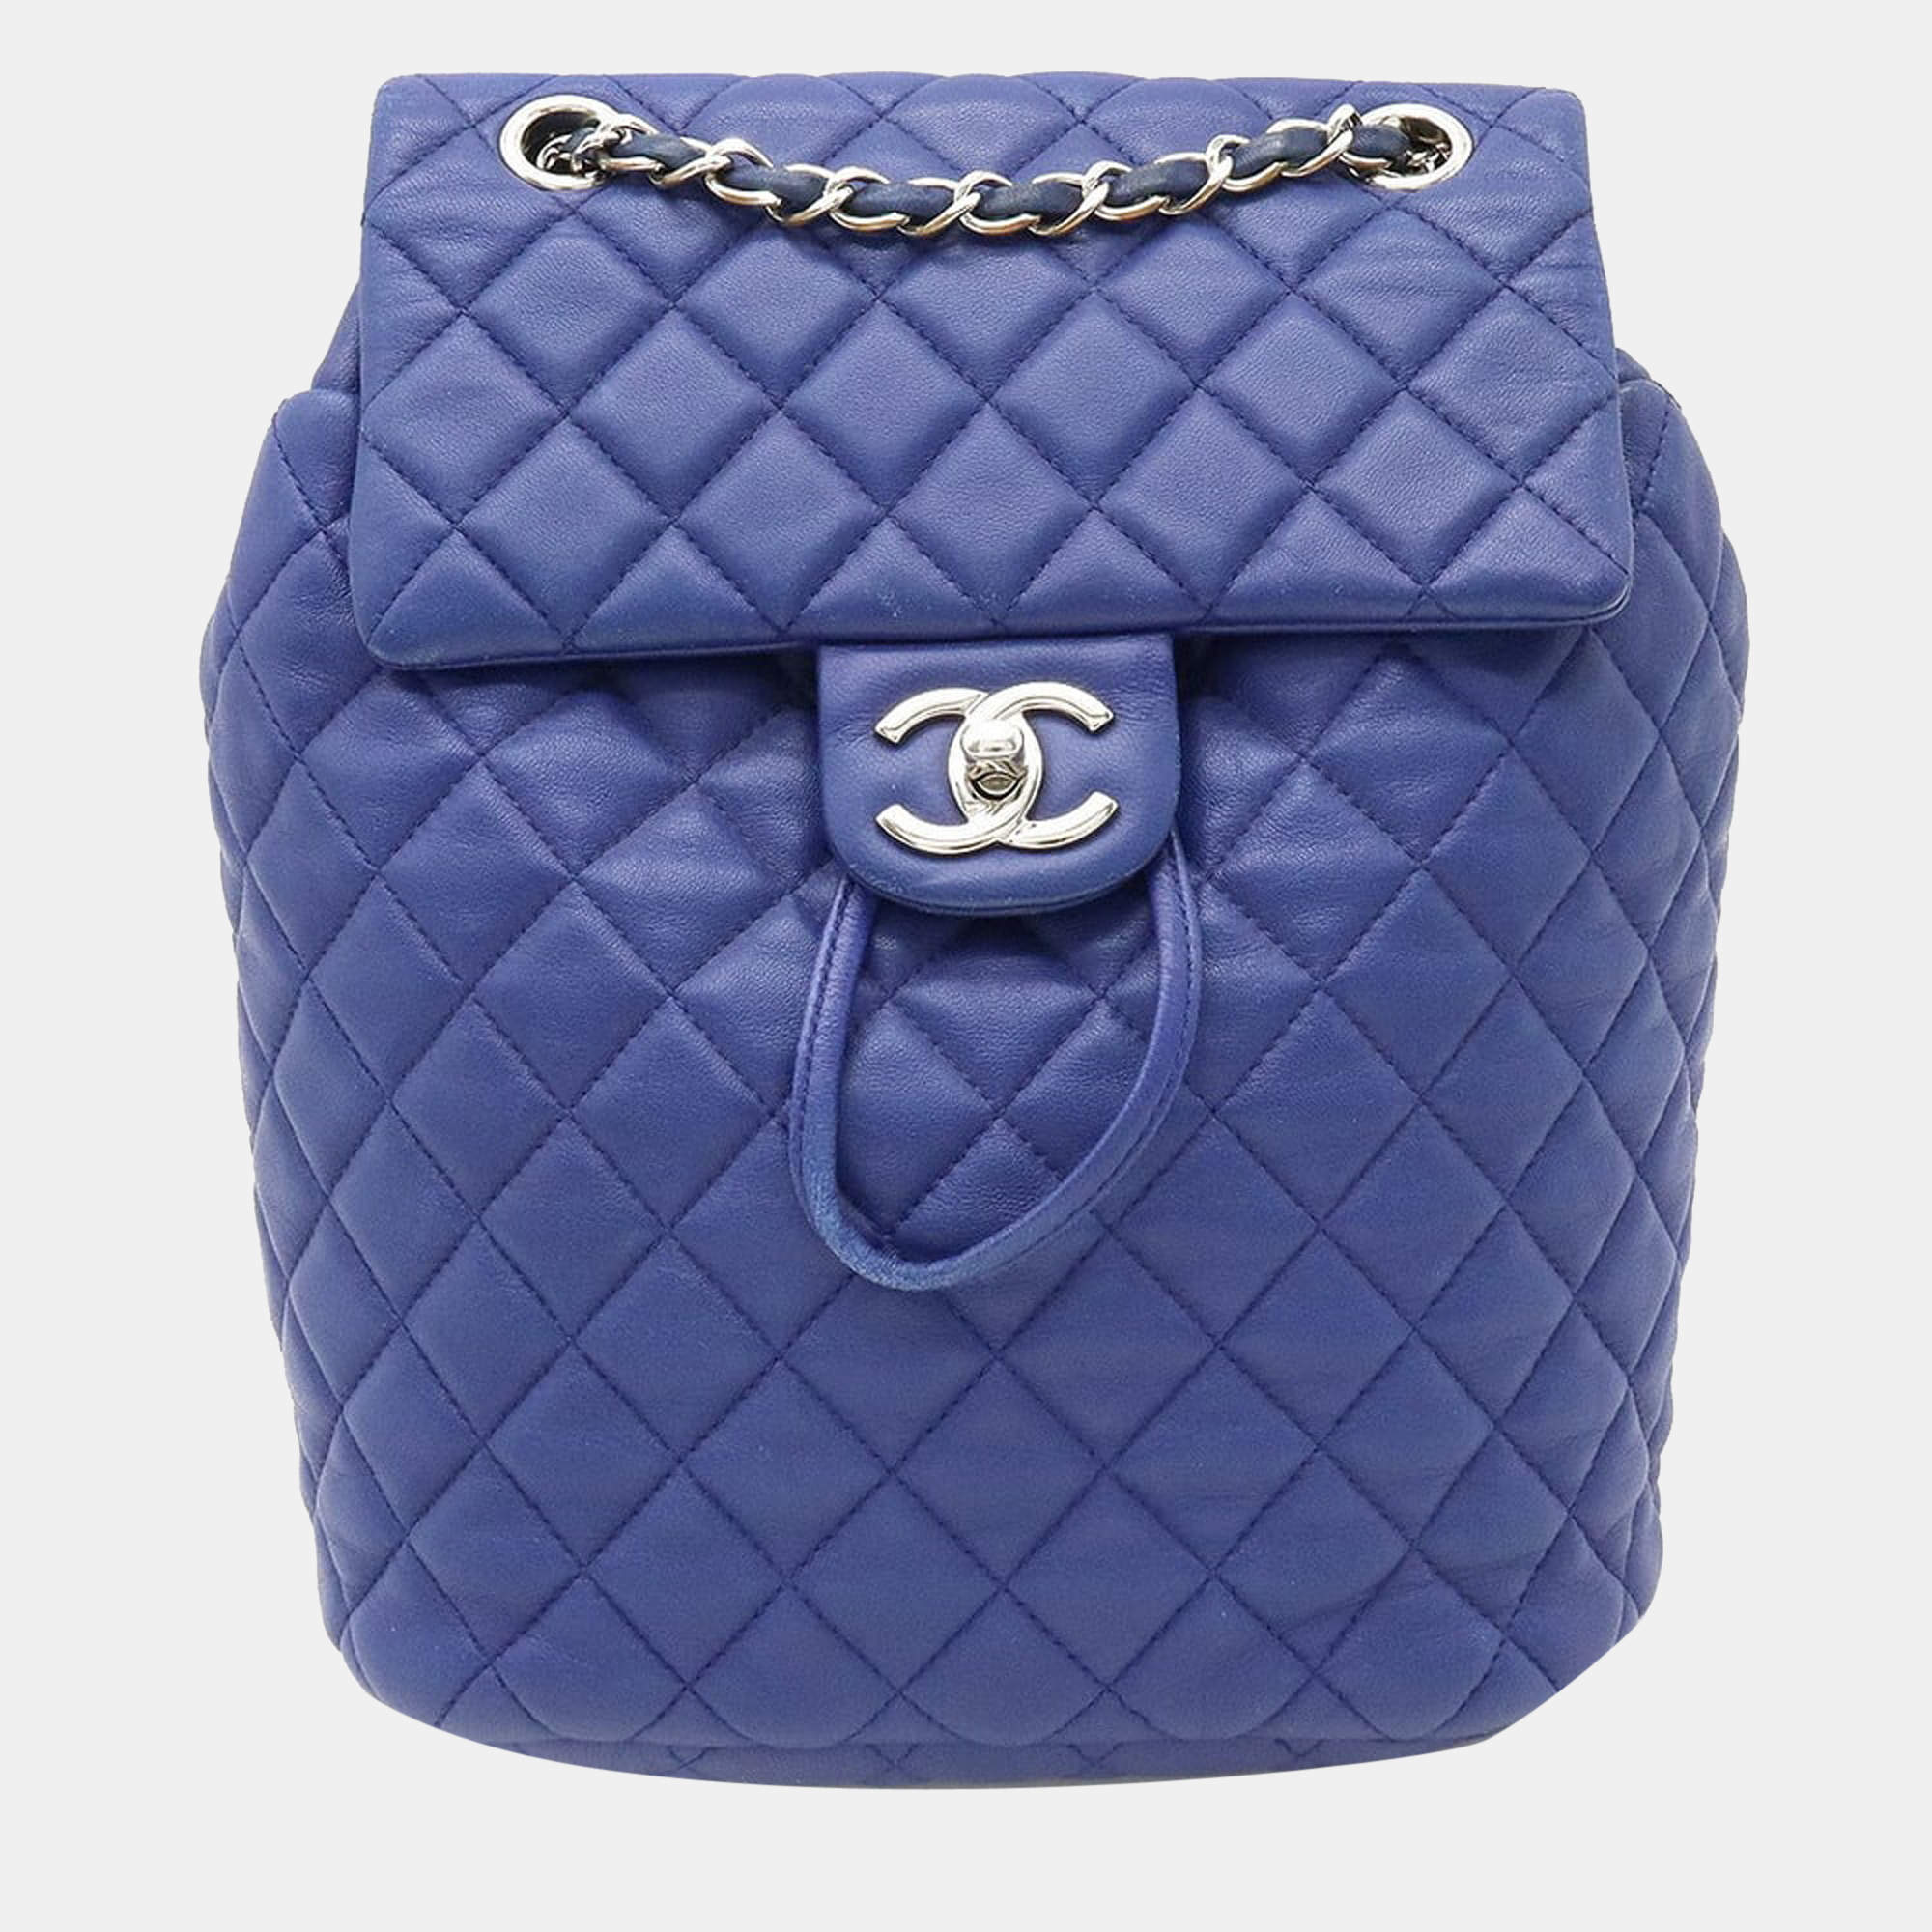 Chanel Blue Leather Urban Spirit Backpack Chanel